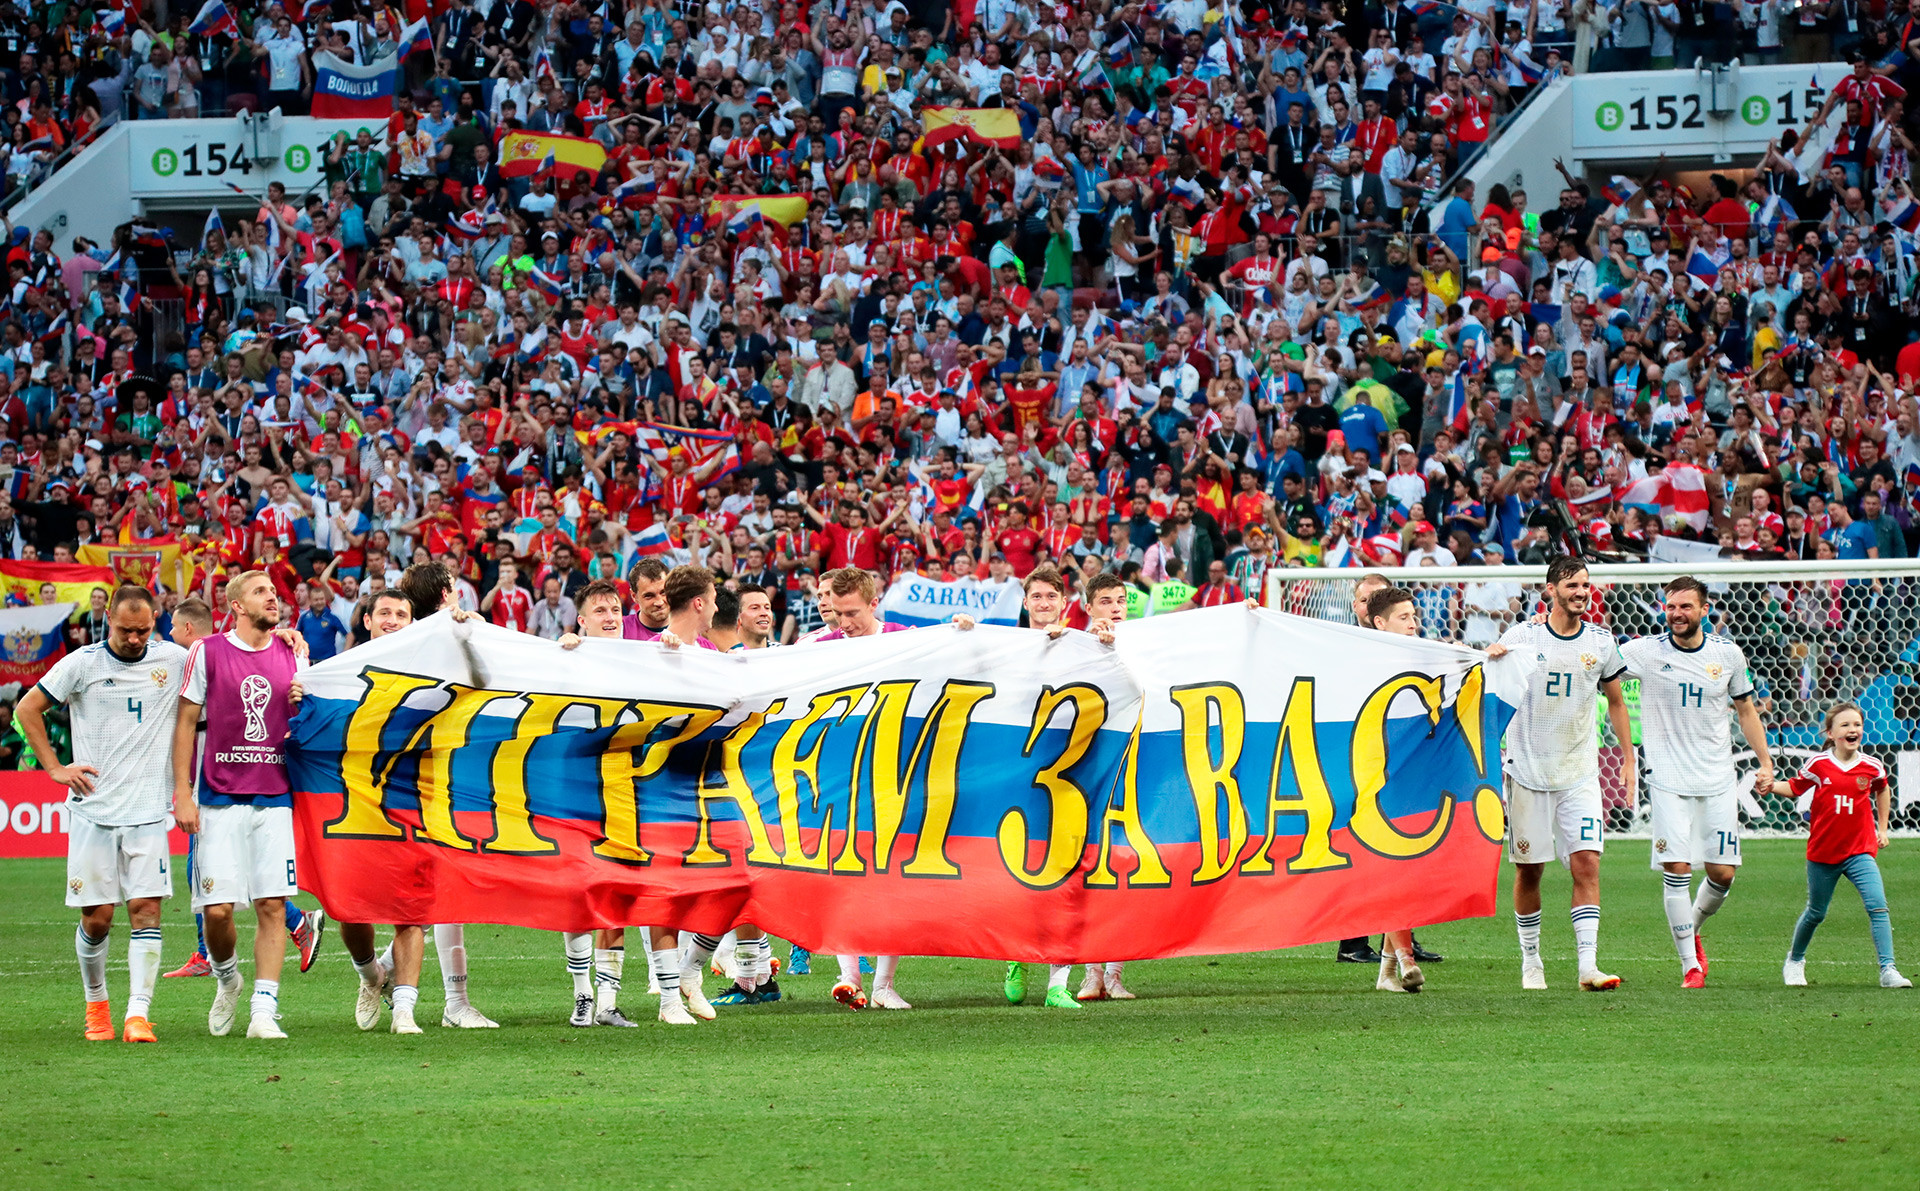 Team Russia's players carrying the banner 